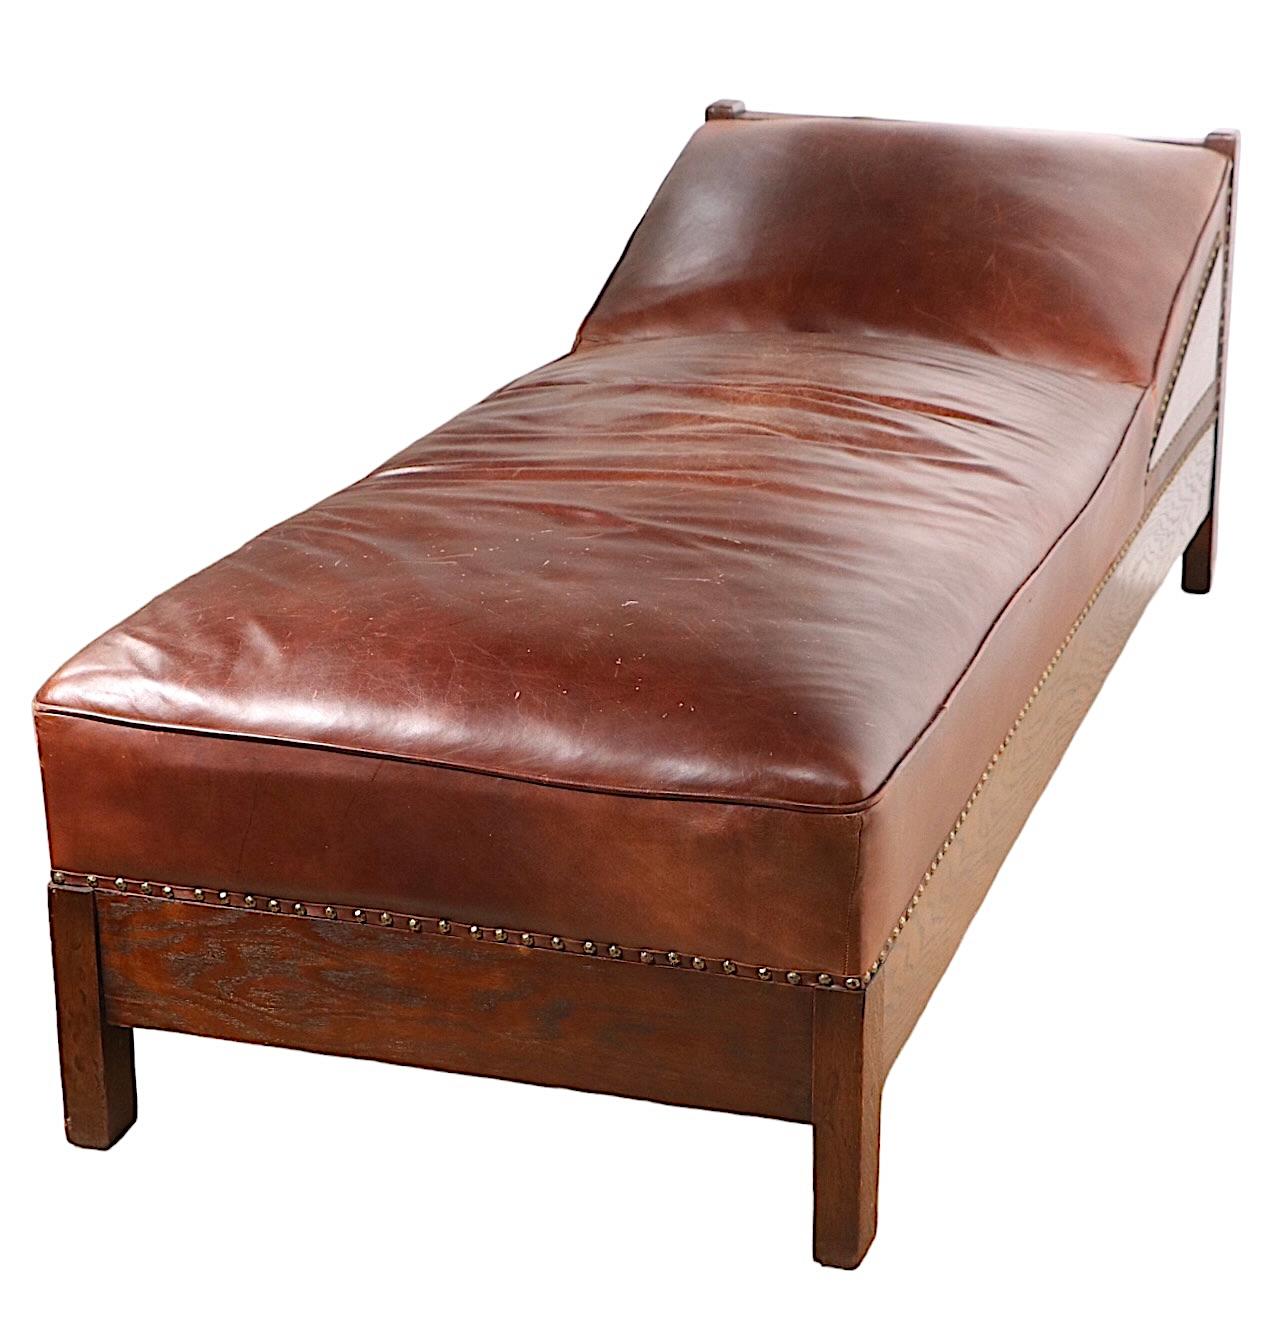 Oak and Leather Arts and Crafts Mission Daybed Chaise Lounge c. 1900 -1920's 3